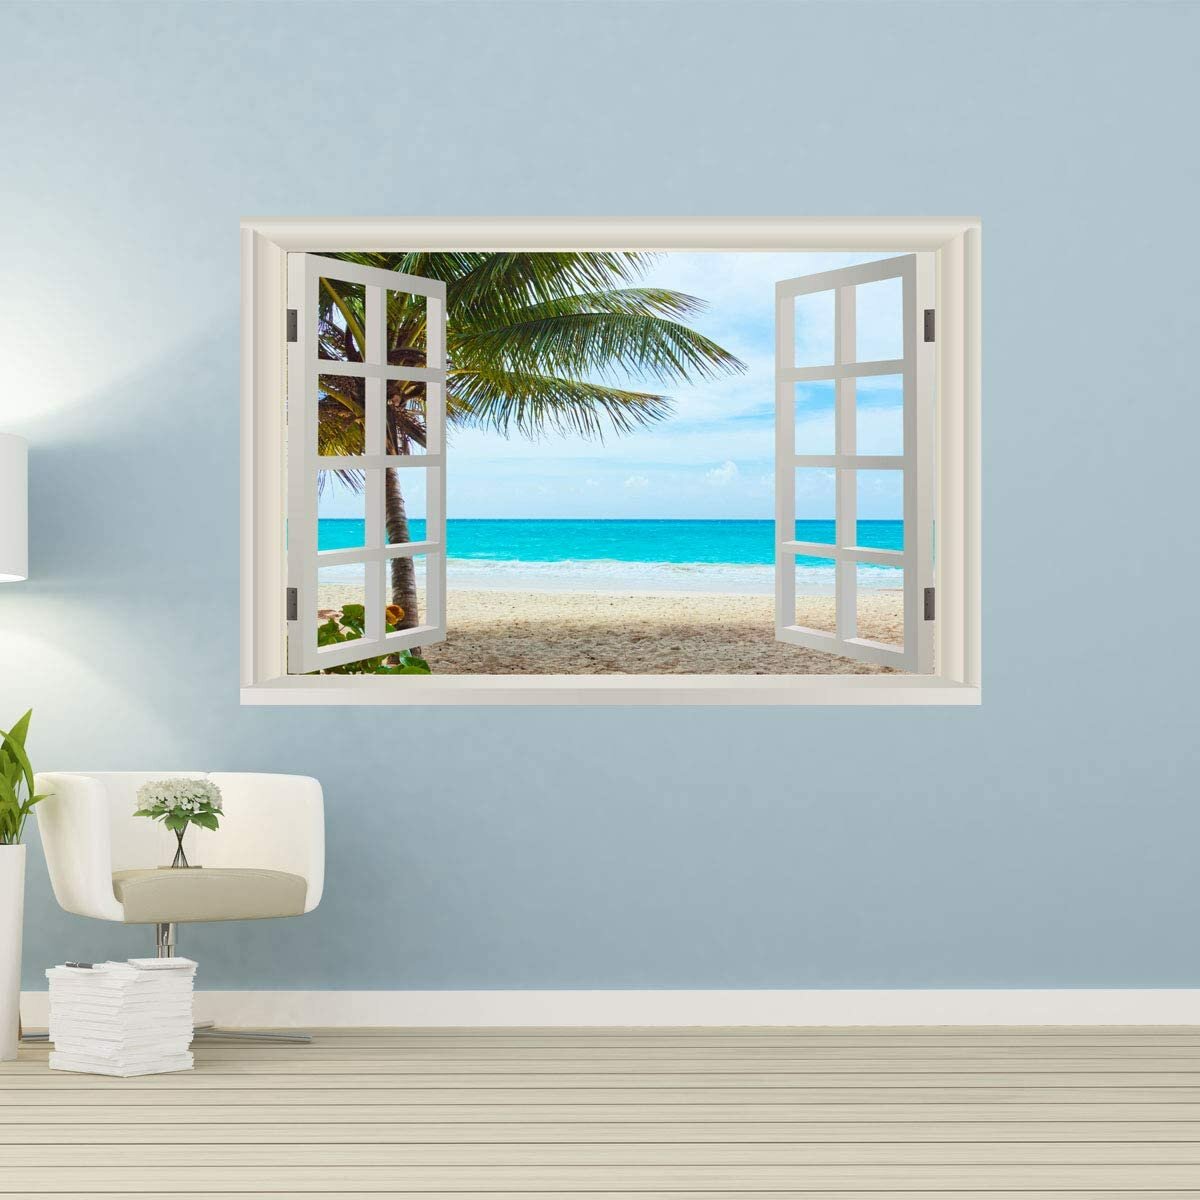 Fake Windows Wall Stickers Wall Decal Removable Sea Vinyl Home Bedroom Mural Hot 